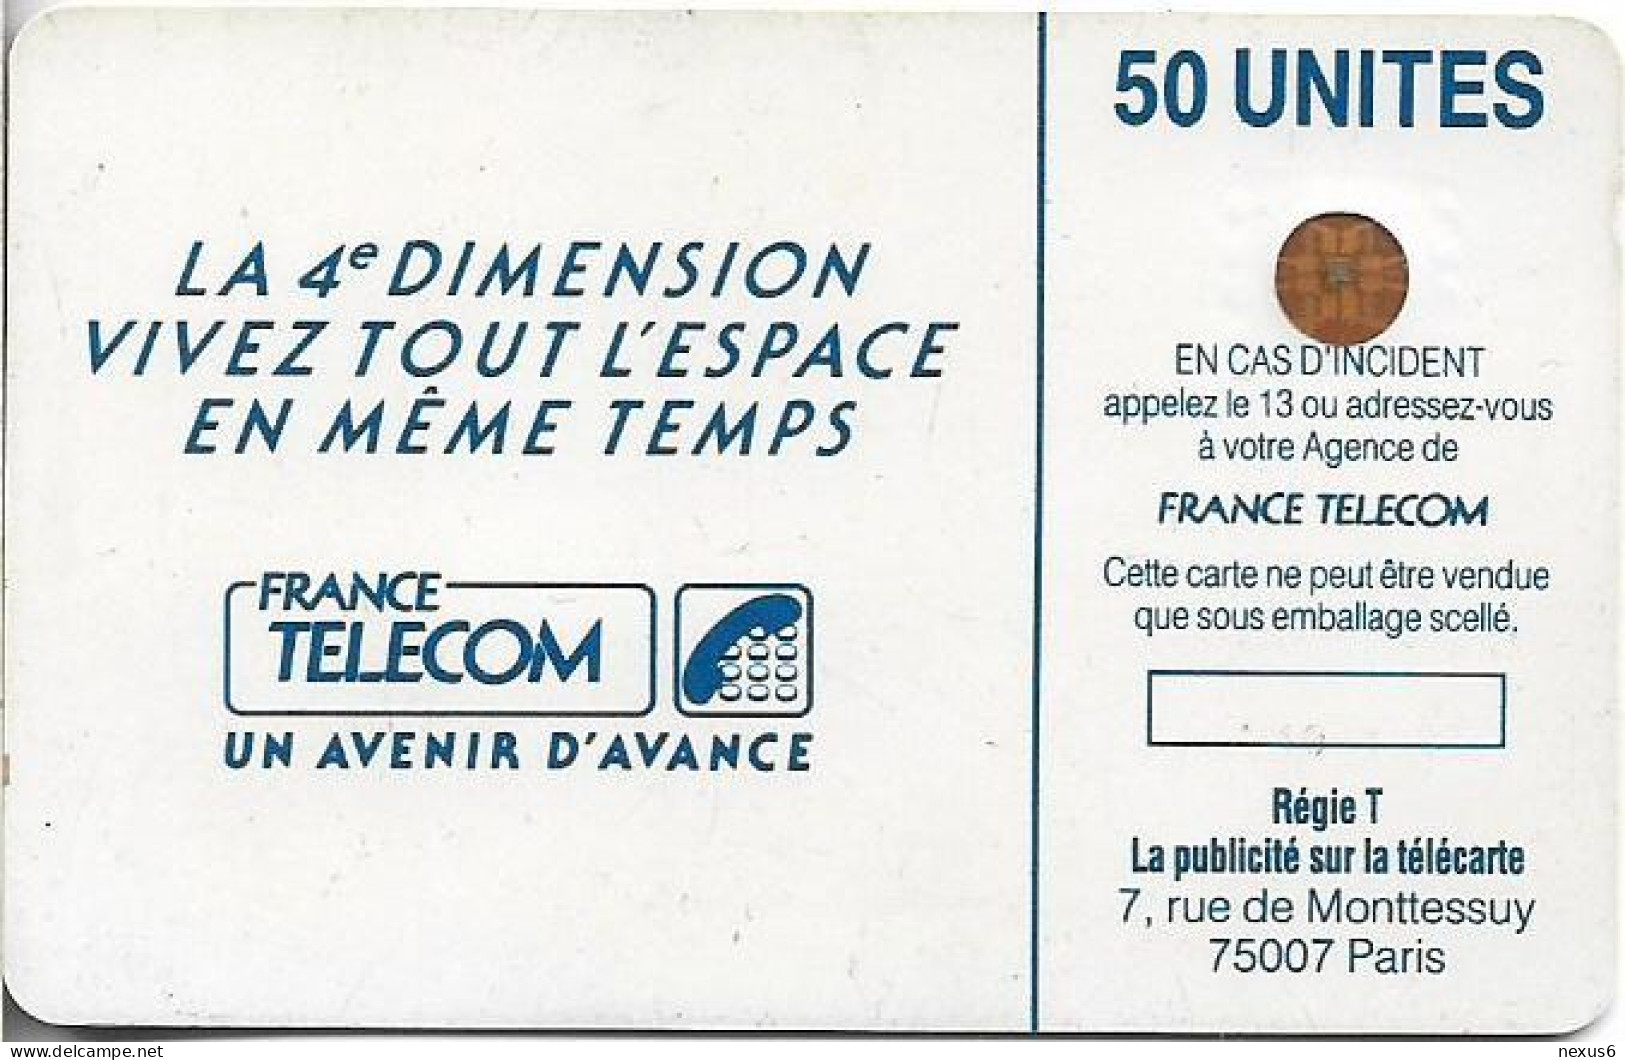 France - 0059.V2 - Lucy , SC3, Cn. 105112 (Out Of Frame), 03.1989, 50Units, 185.000ex, Used - 1989